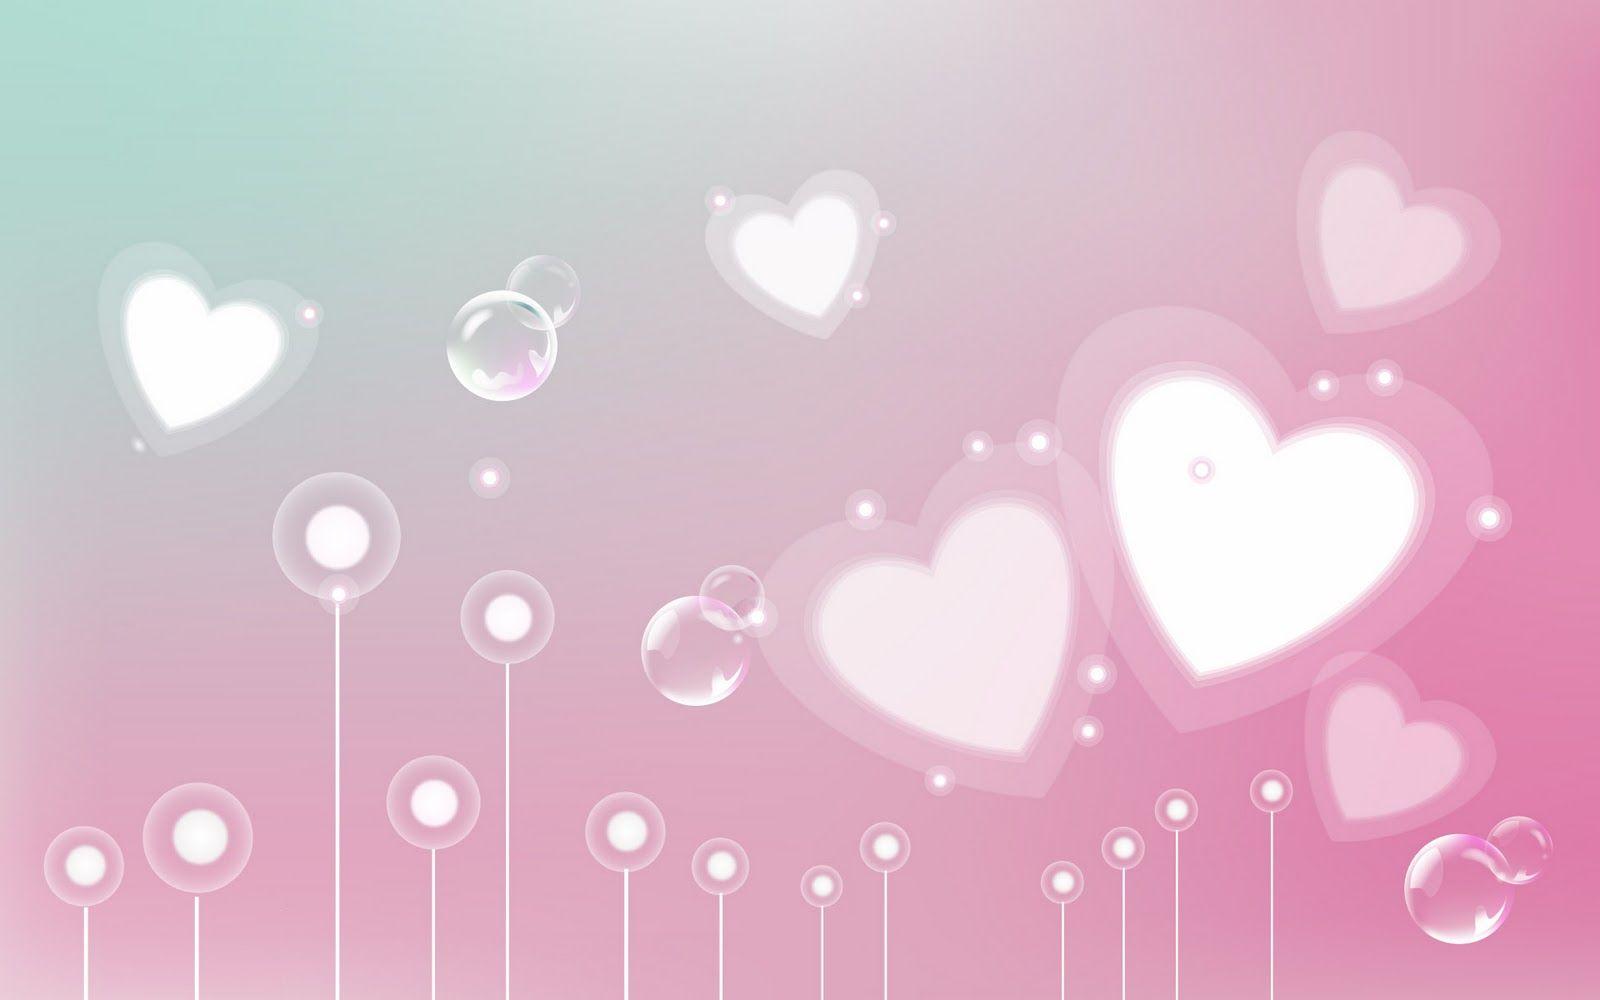 Life for SMS: Happy valentines day background 2